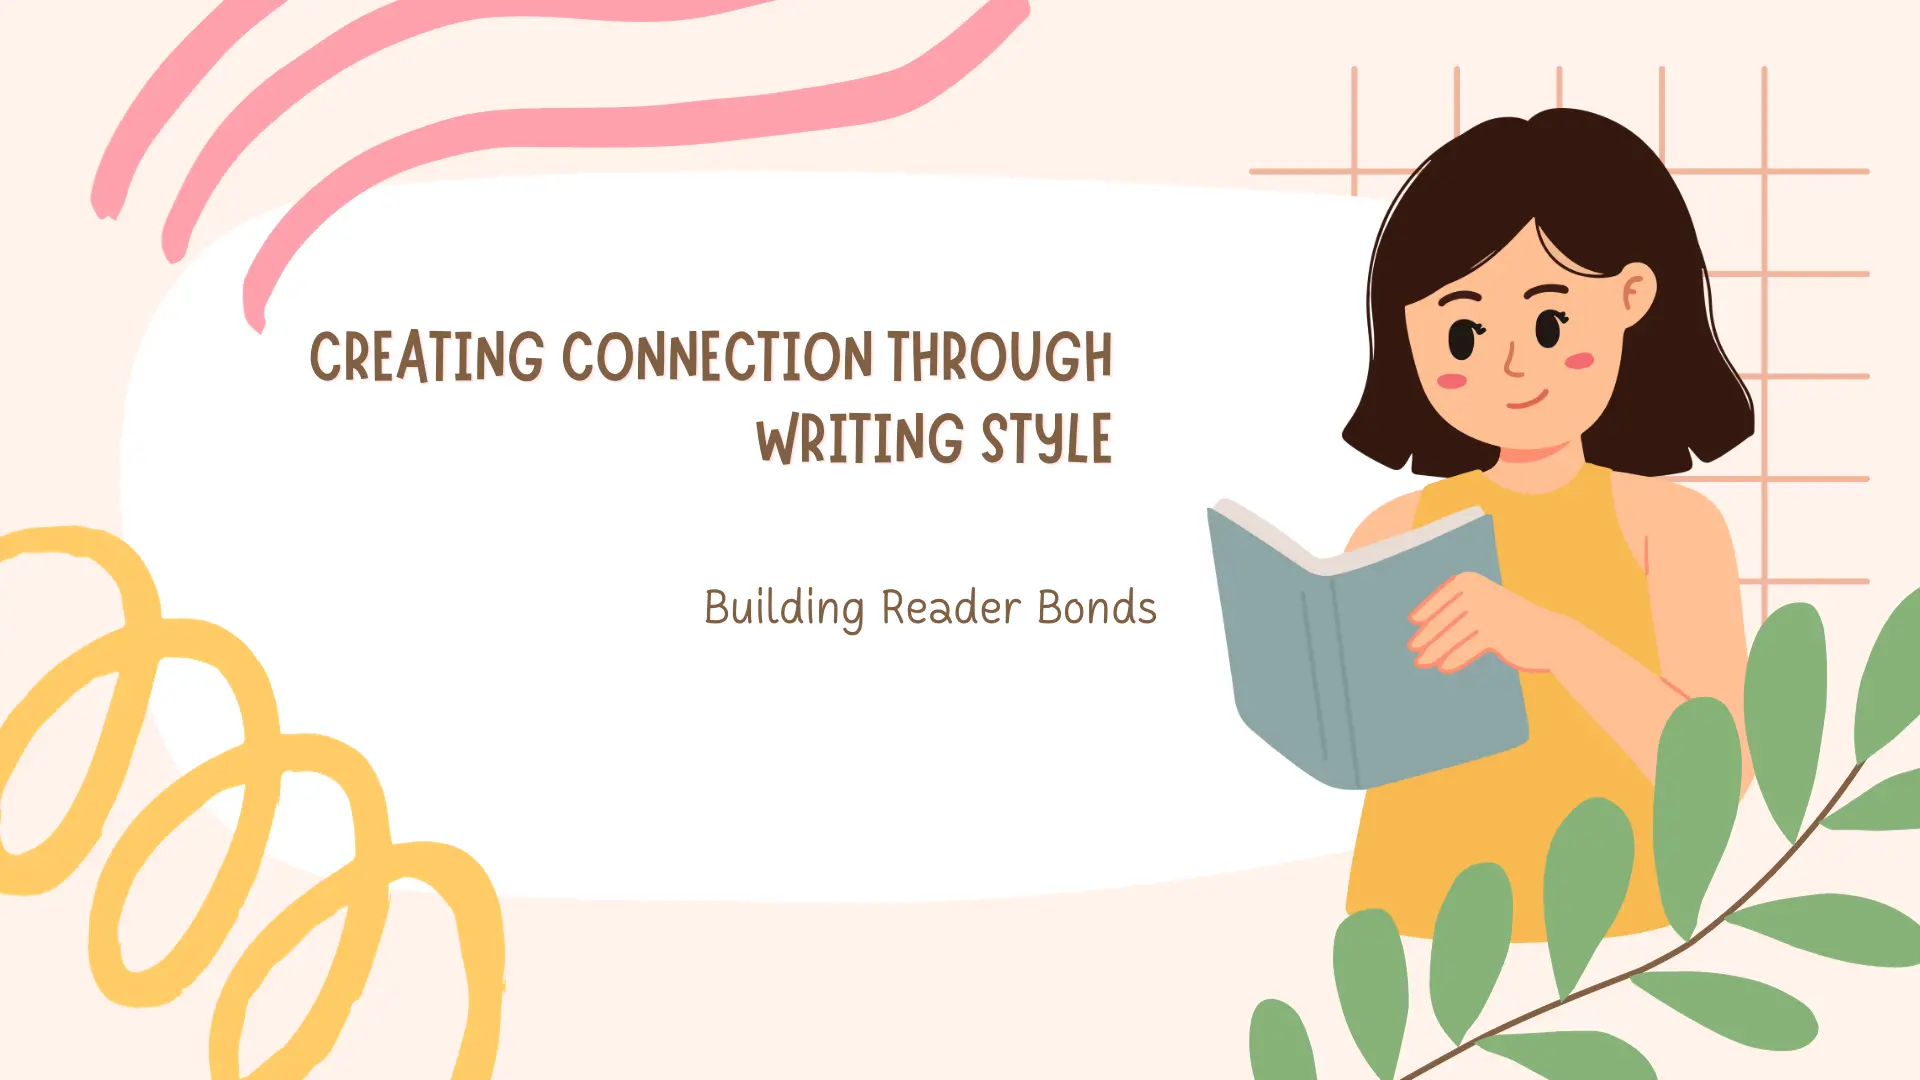 Building Reader Bonds: Creating Connection Through Writing Style